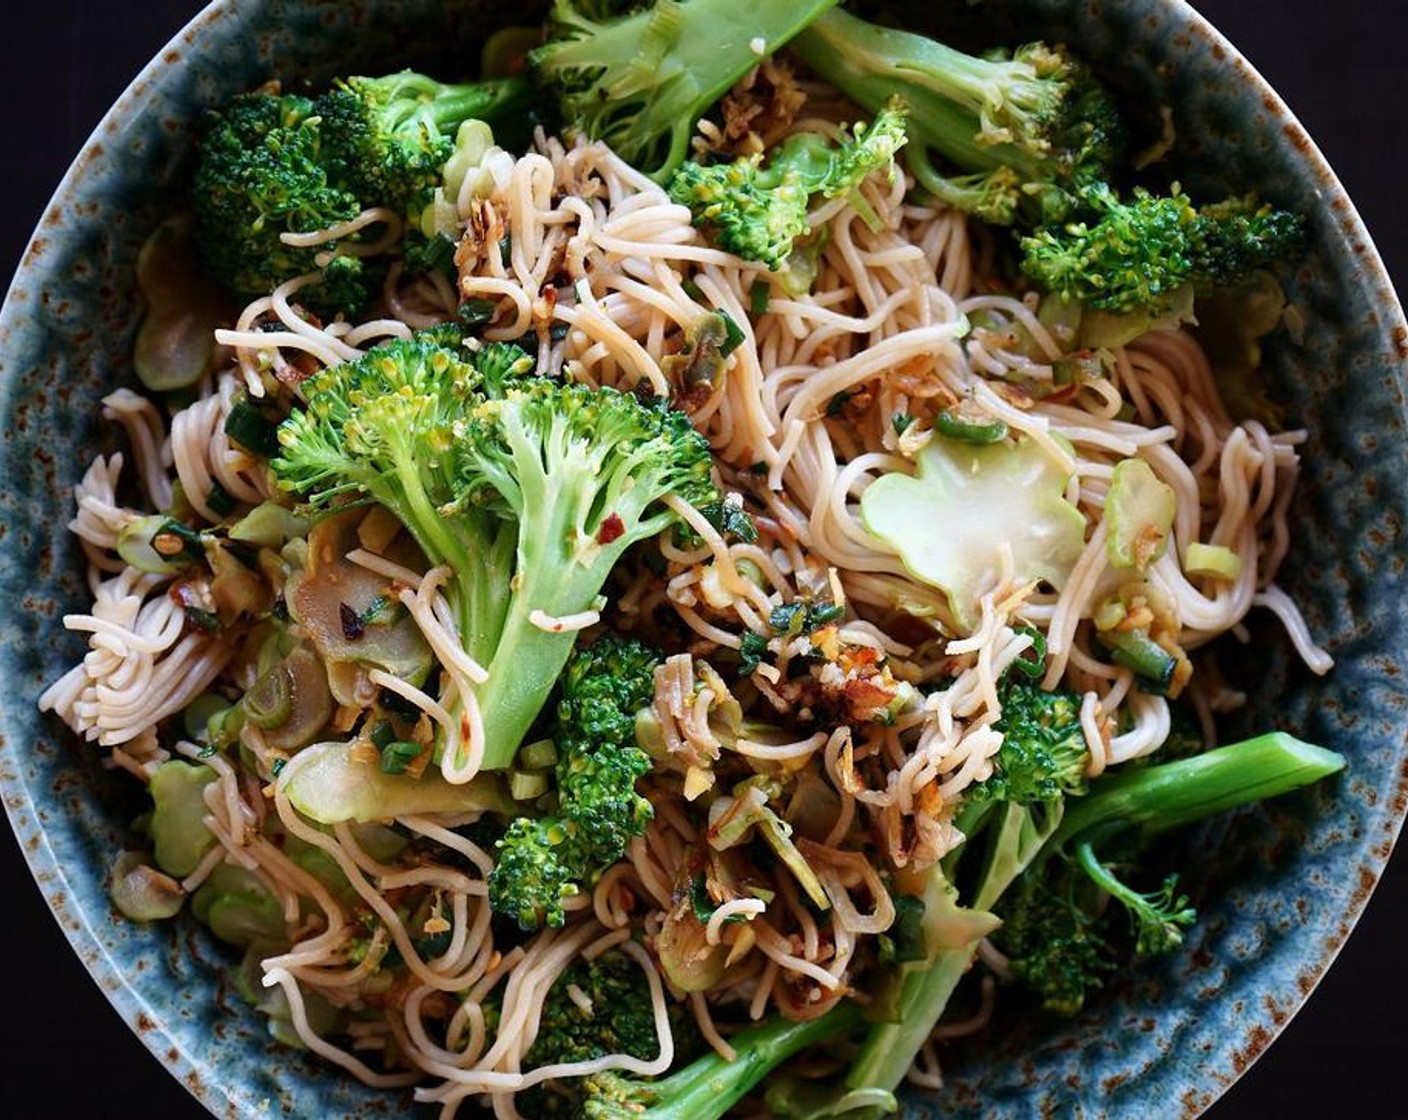 Ginger Scallion Noodles with Broccoli and Carrots